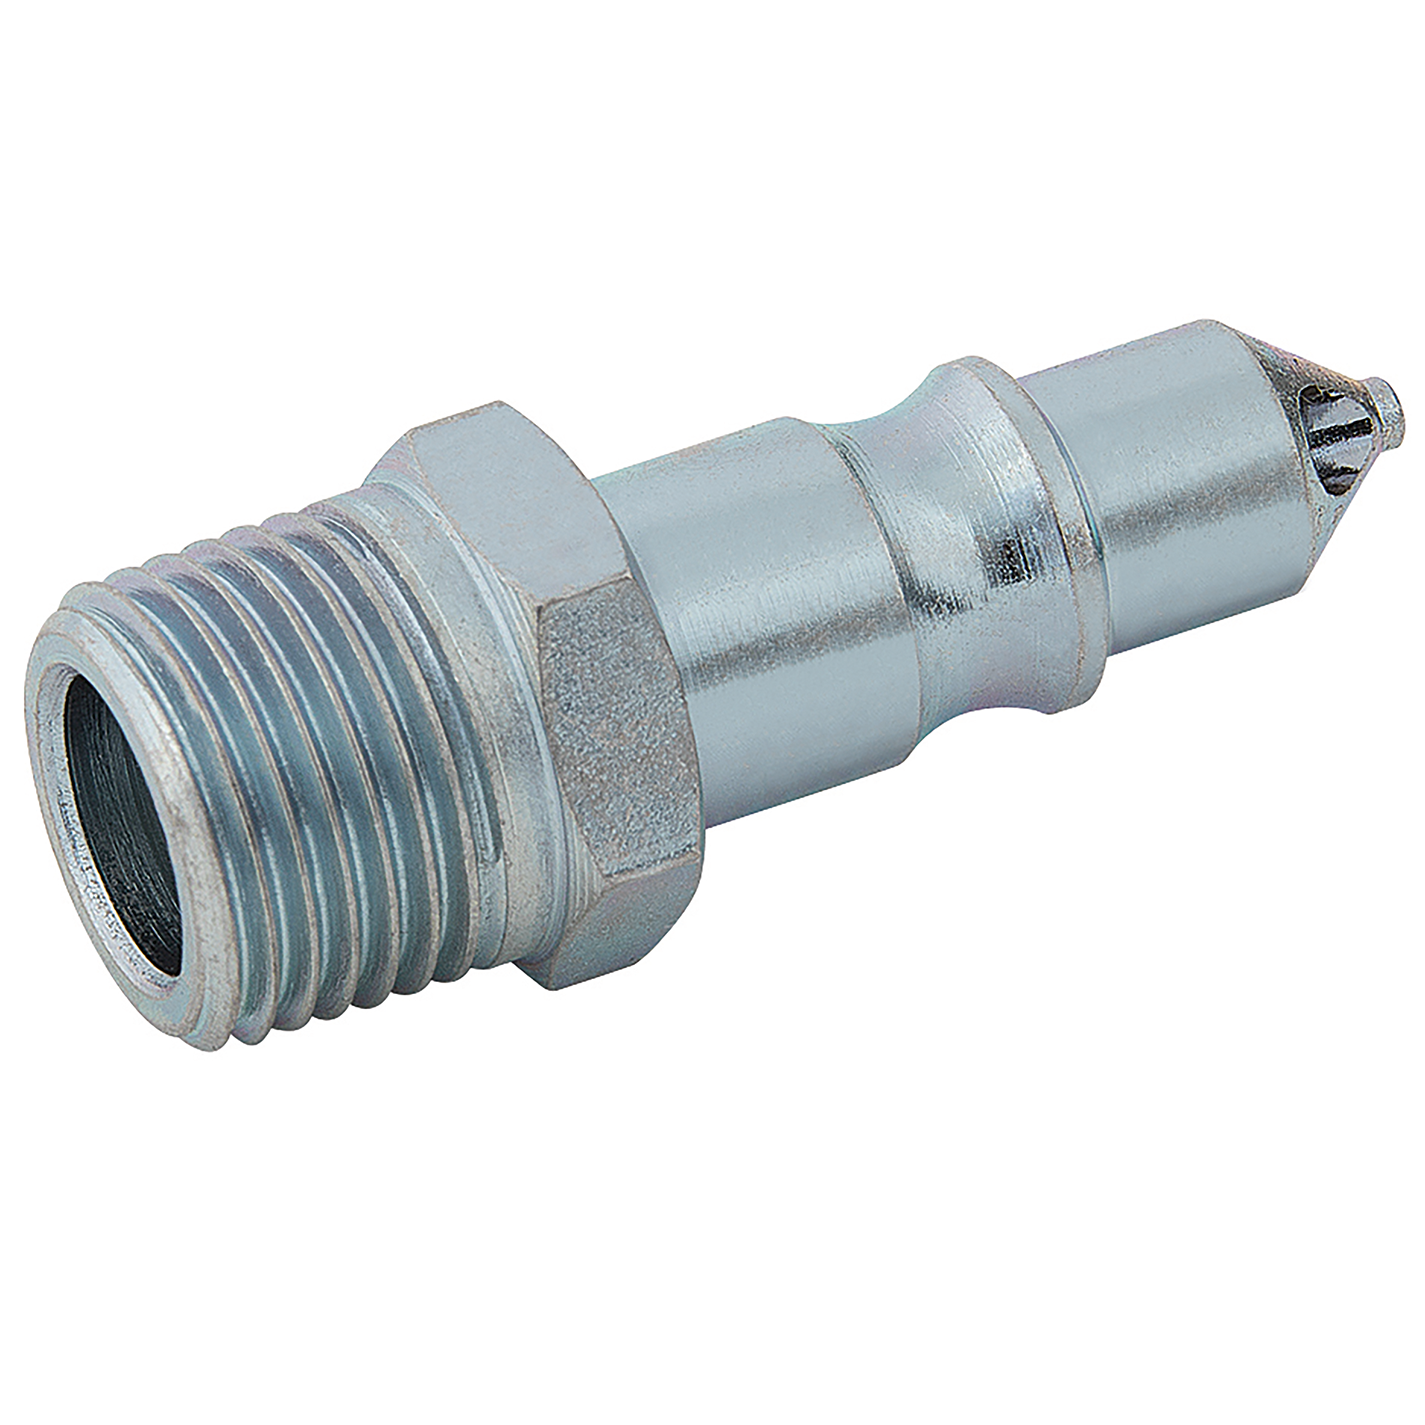 1/2" BSPT MALE ADAPTOR PCL SAFETY